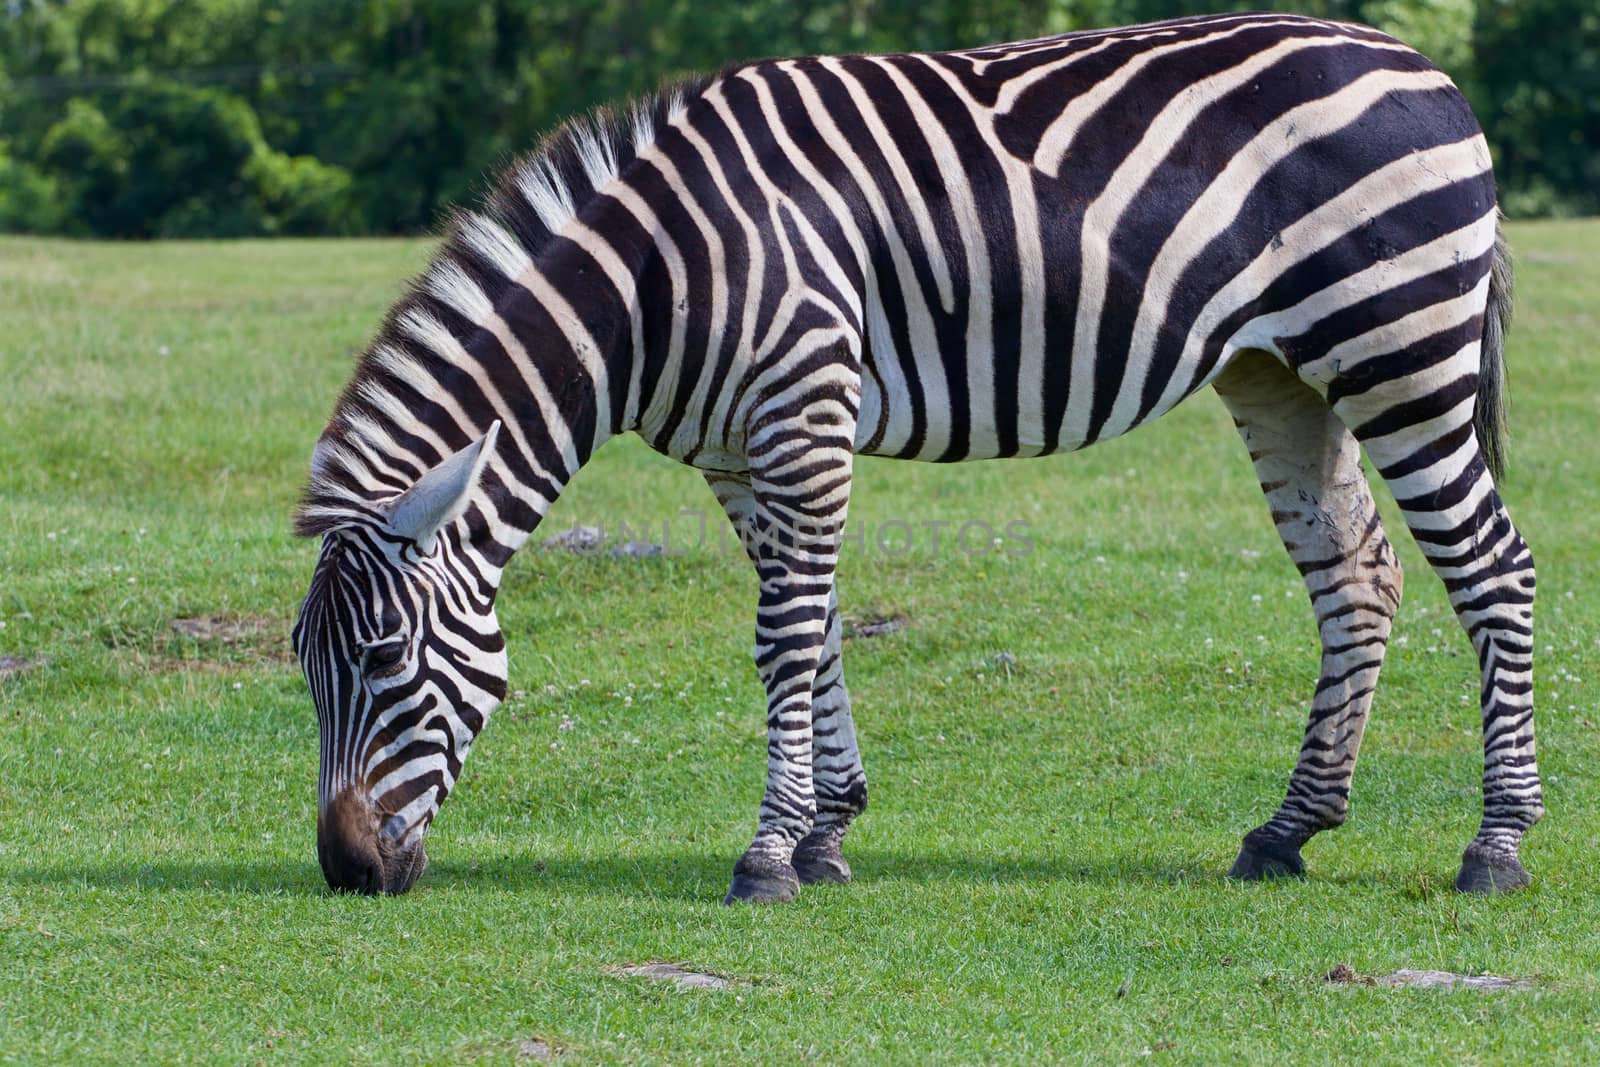 The zebra is eating the grass by teo